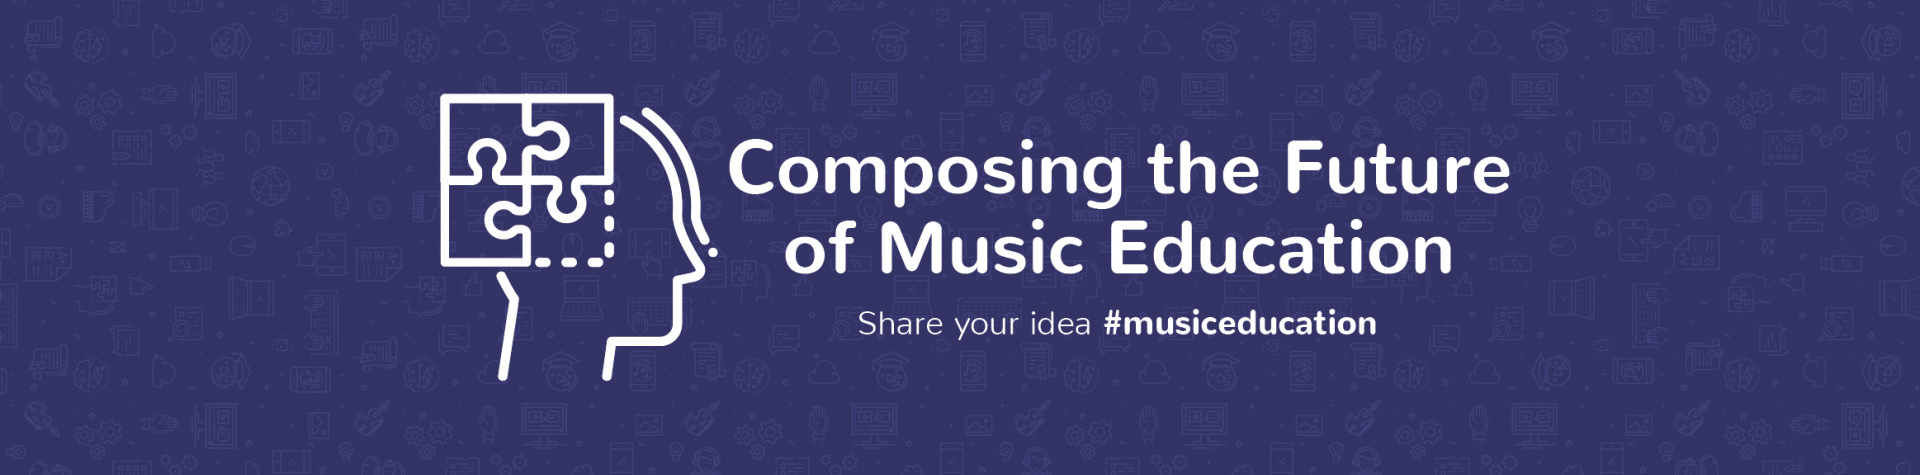 Music Educators Share Their Thoughts on Digital Music Education